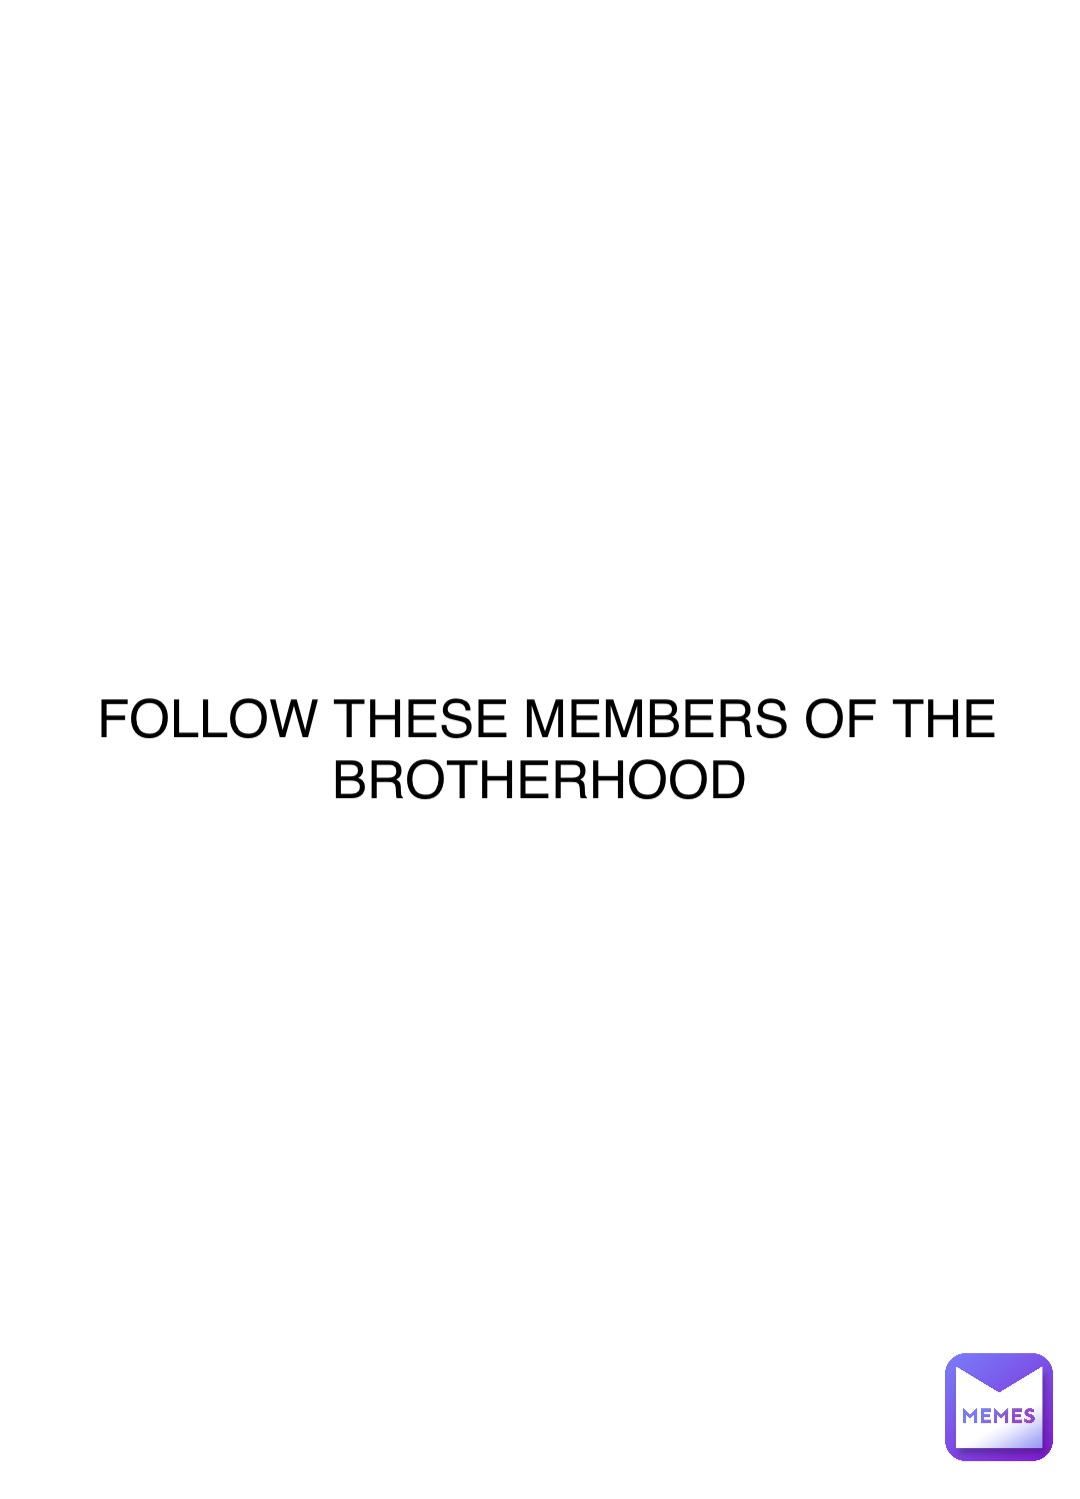 Double tap to edit FOLLOW THESE MEMBERS OF THE BROTHERHOOD